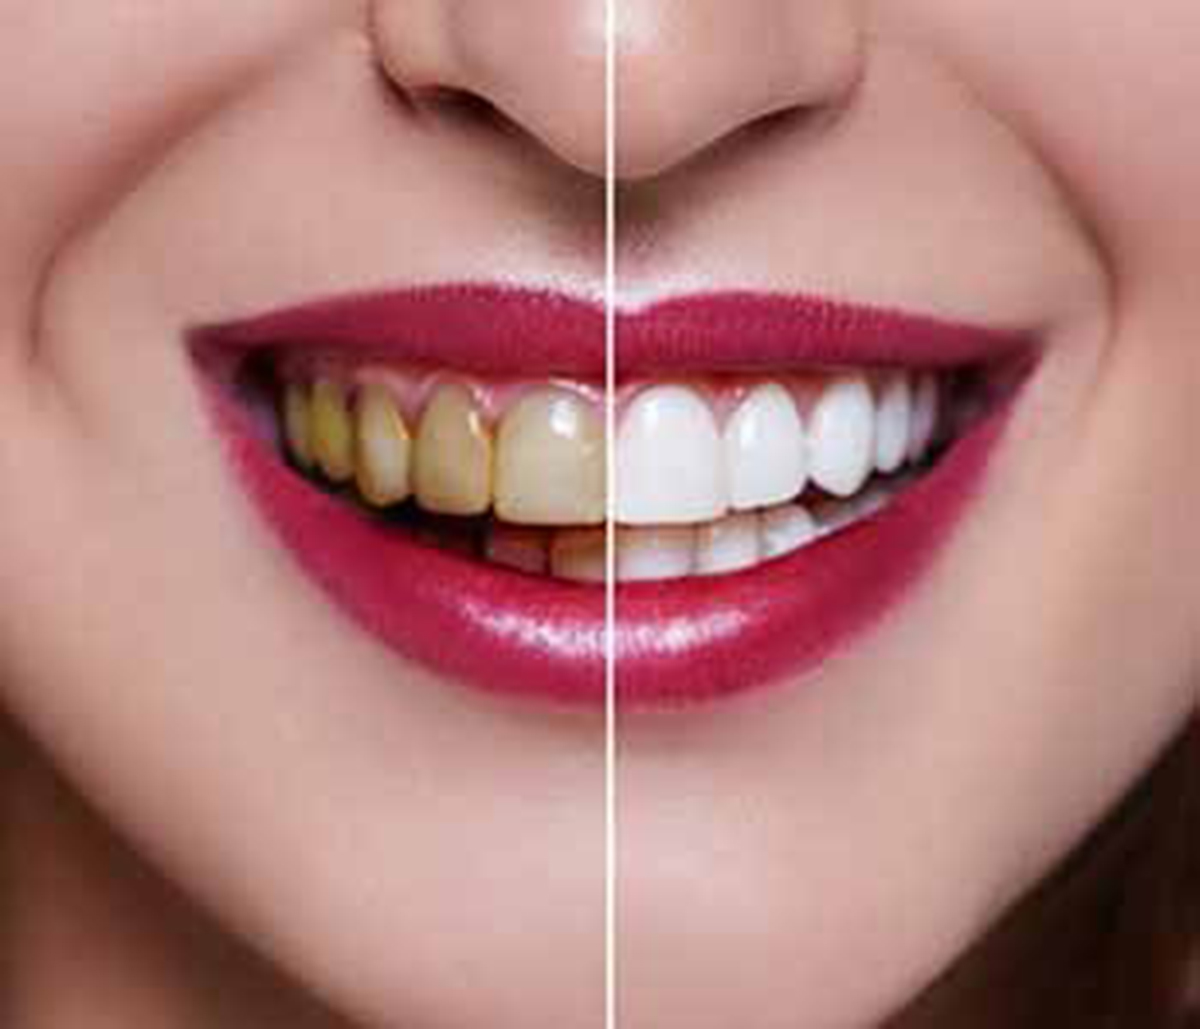 San Francisco, CA dentist, Dr. Arellano, is a dentist who offers professional whitening solutions for patients seeking cosmetic enhancement